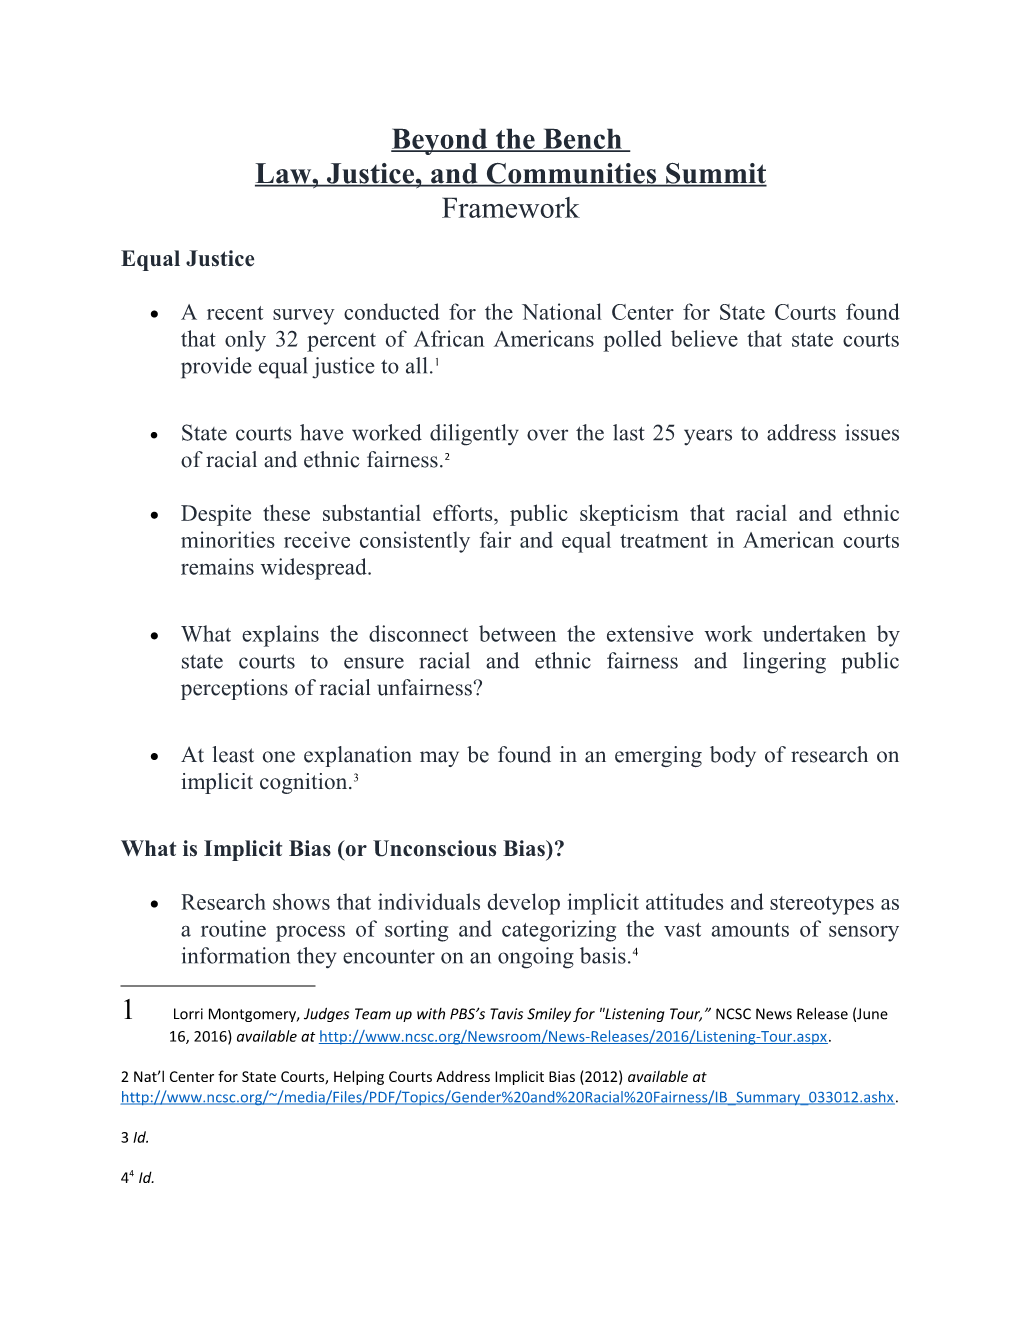 Law, Justice, and Communities Summit